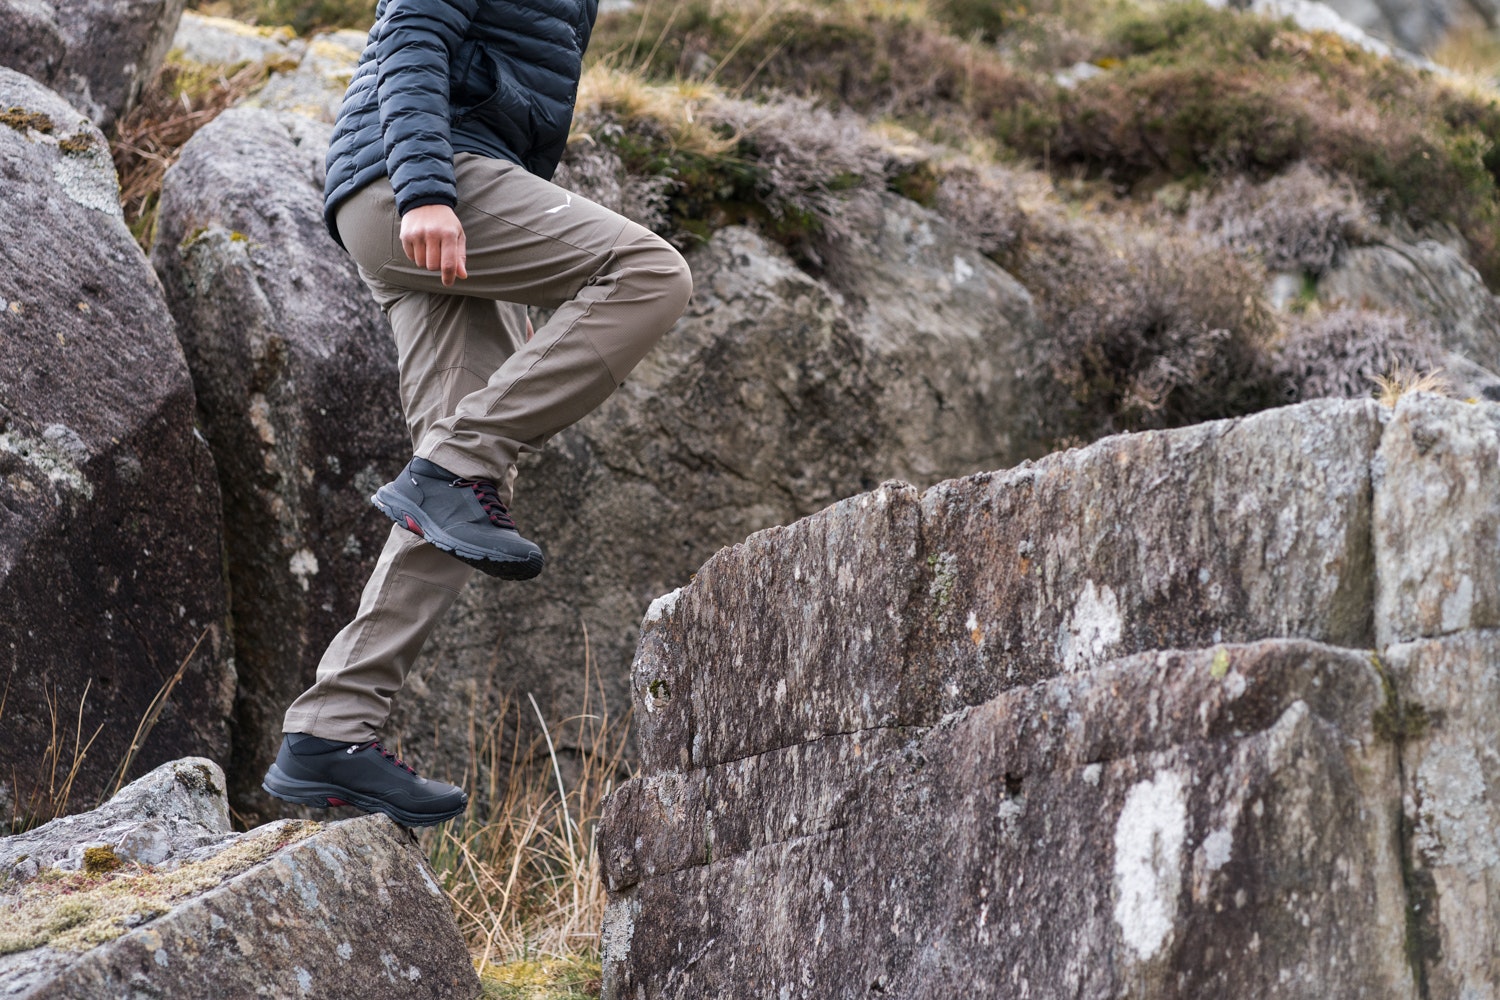 How to find the perfect trekking trousers